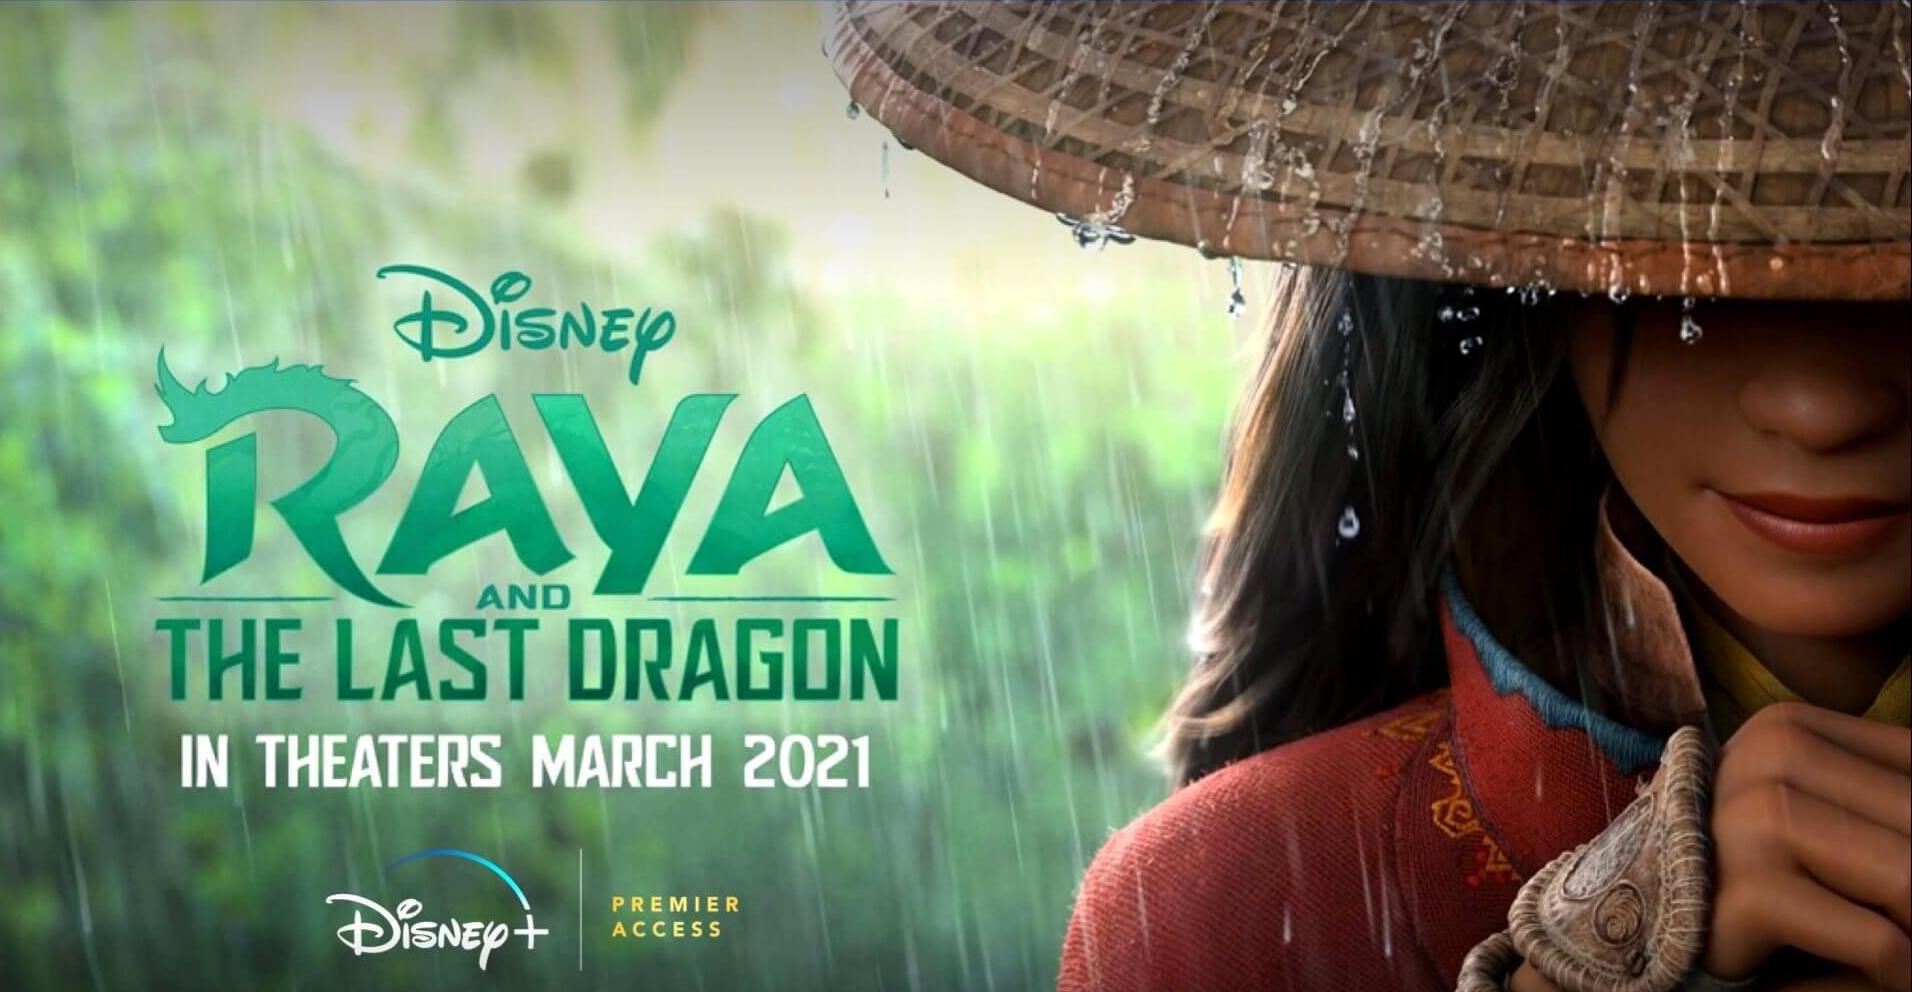 Rumor: Premier Access for ‘Raya and the Last Dragon’ Ending in June